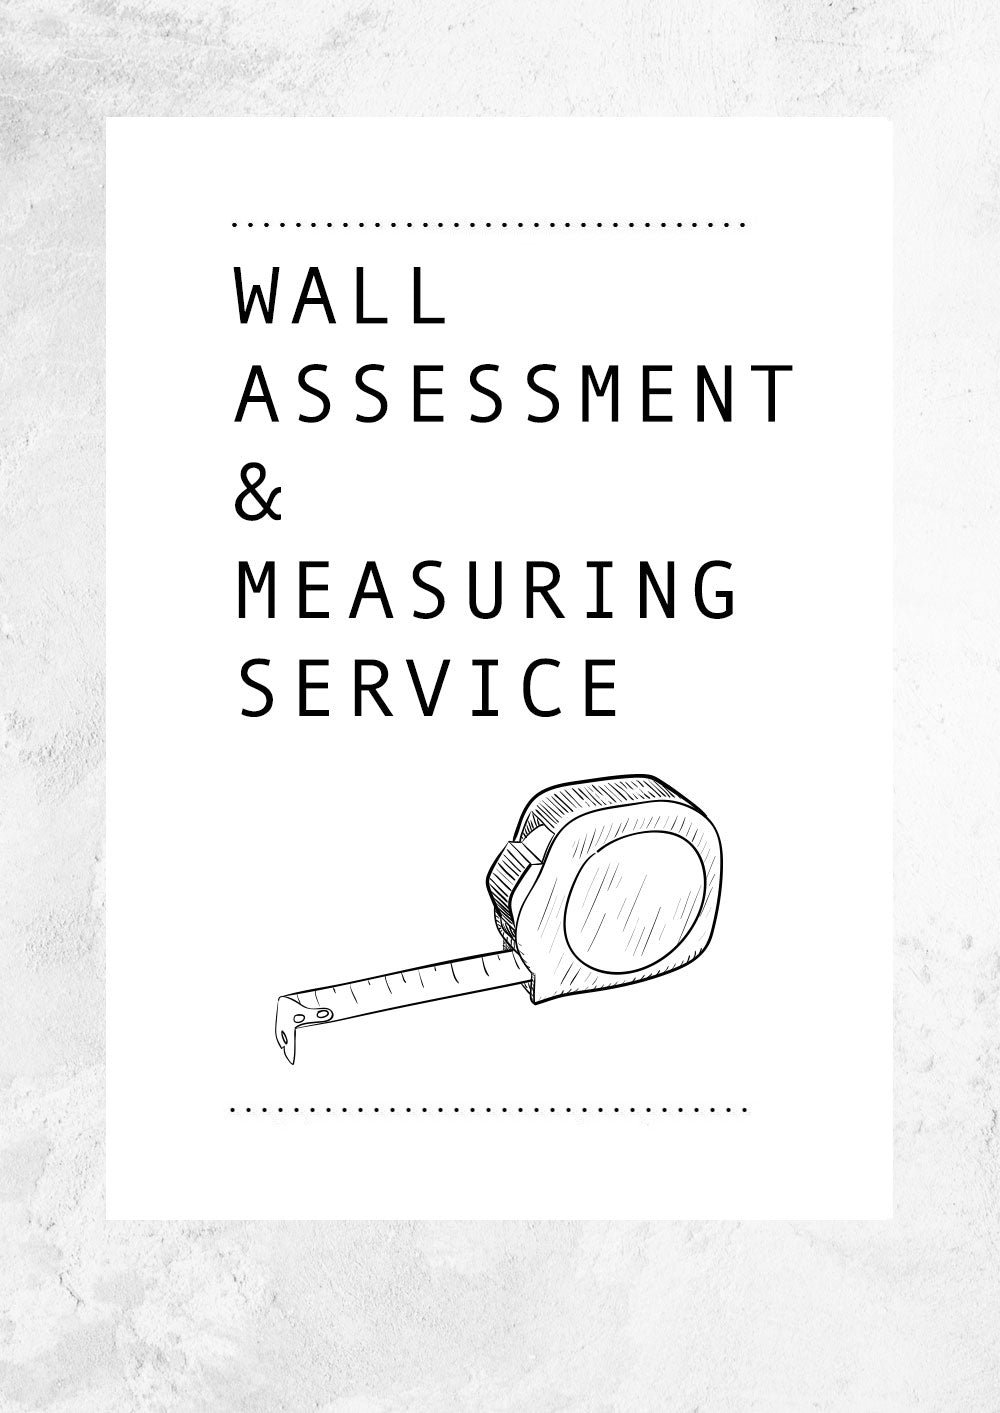 Wall Assessment & Measuring Service